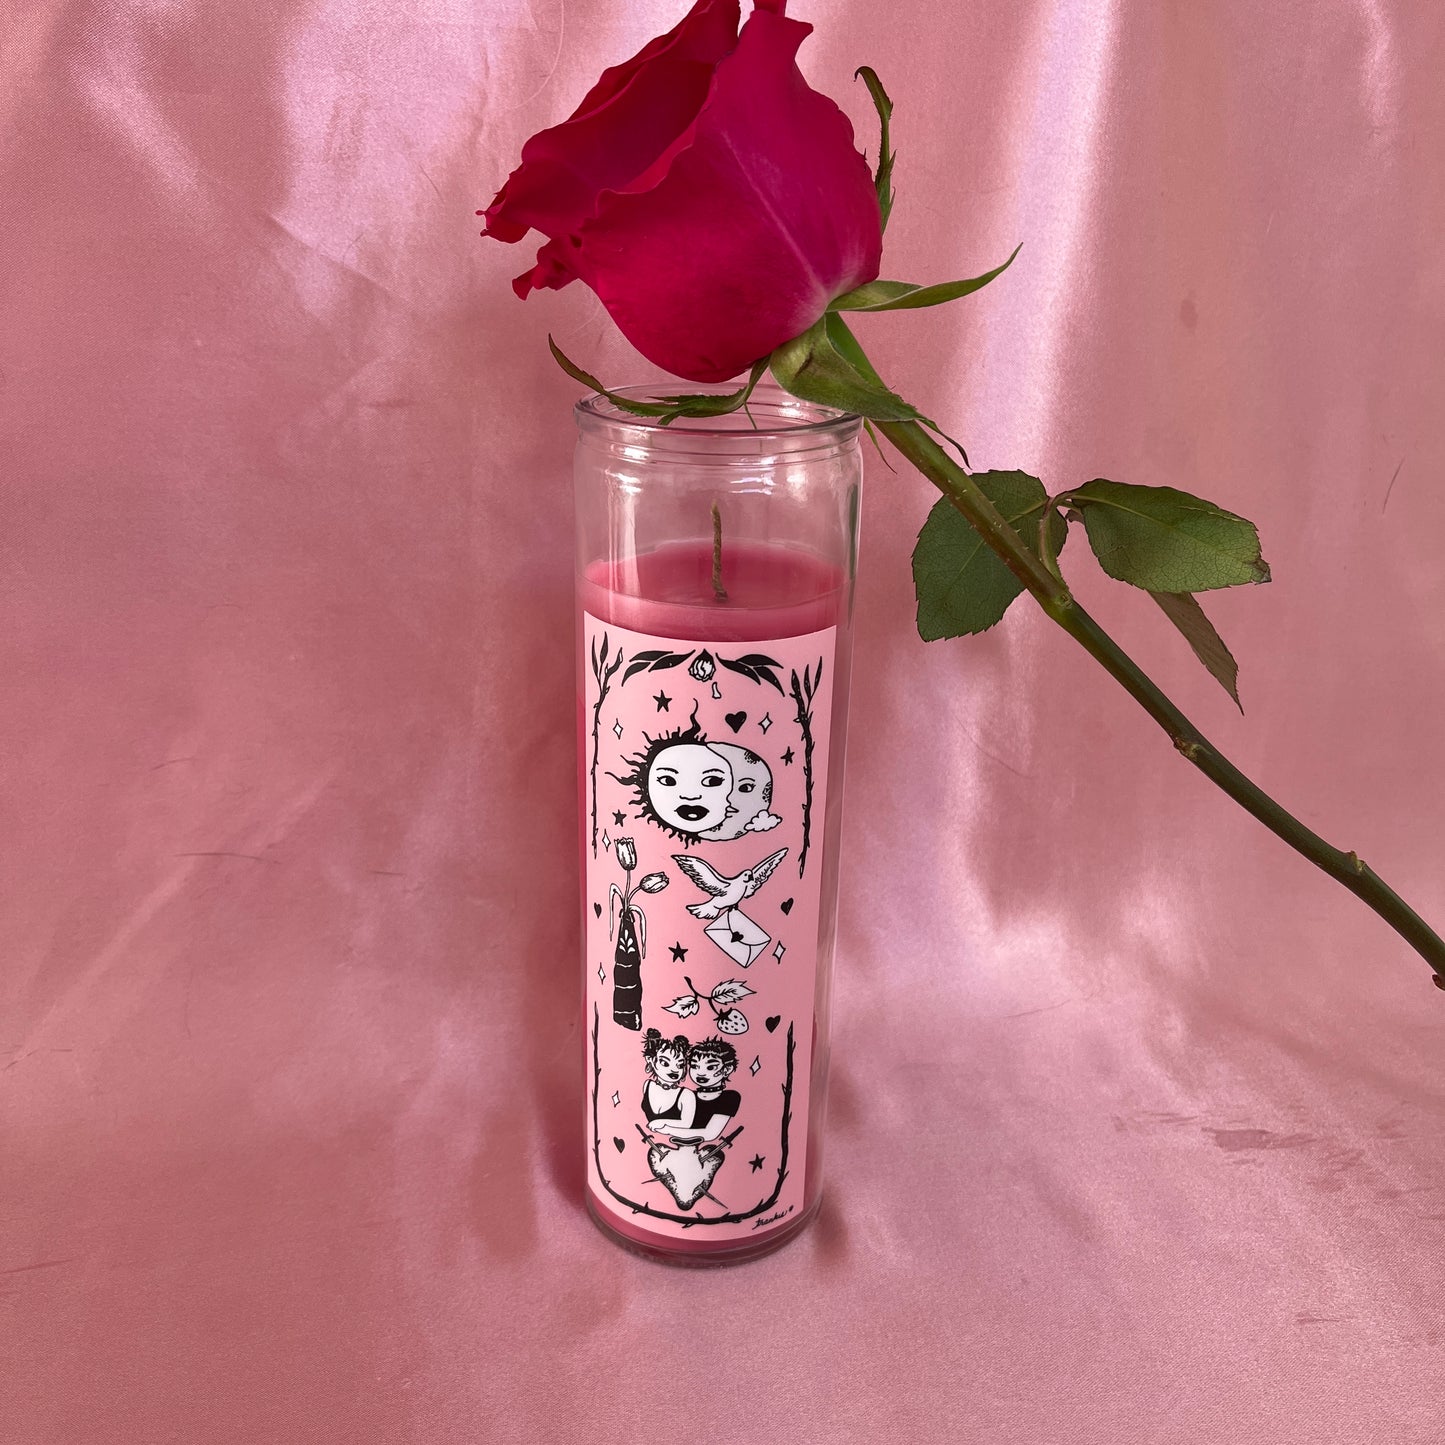 Honey & Roses Altar Candle